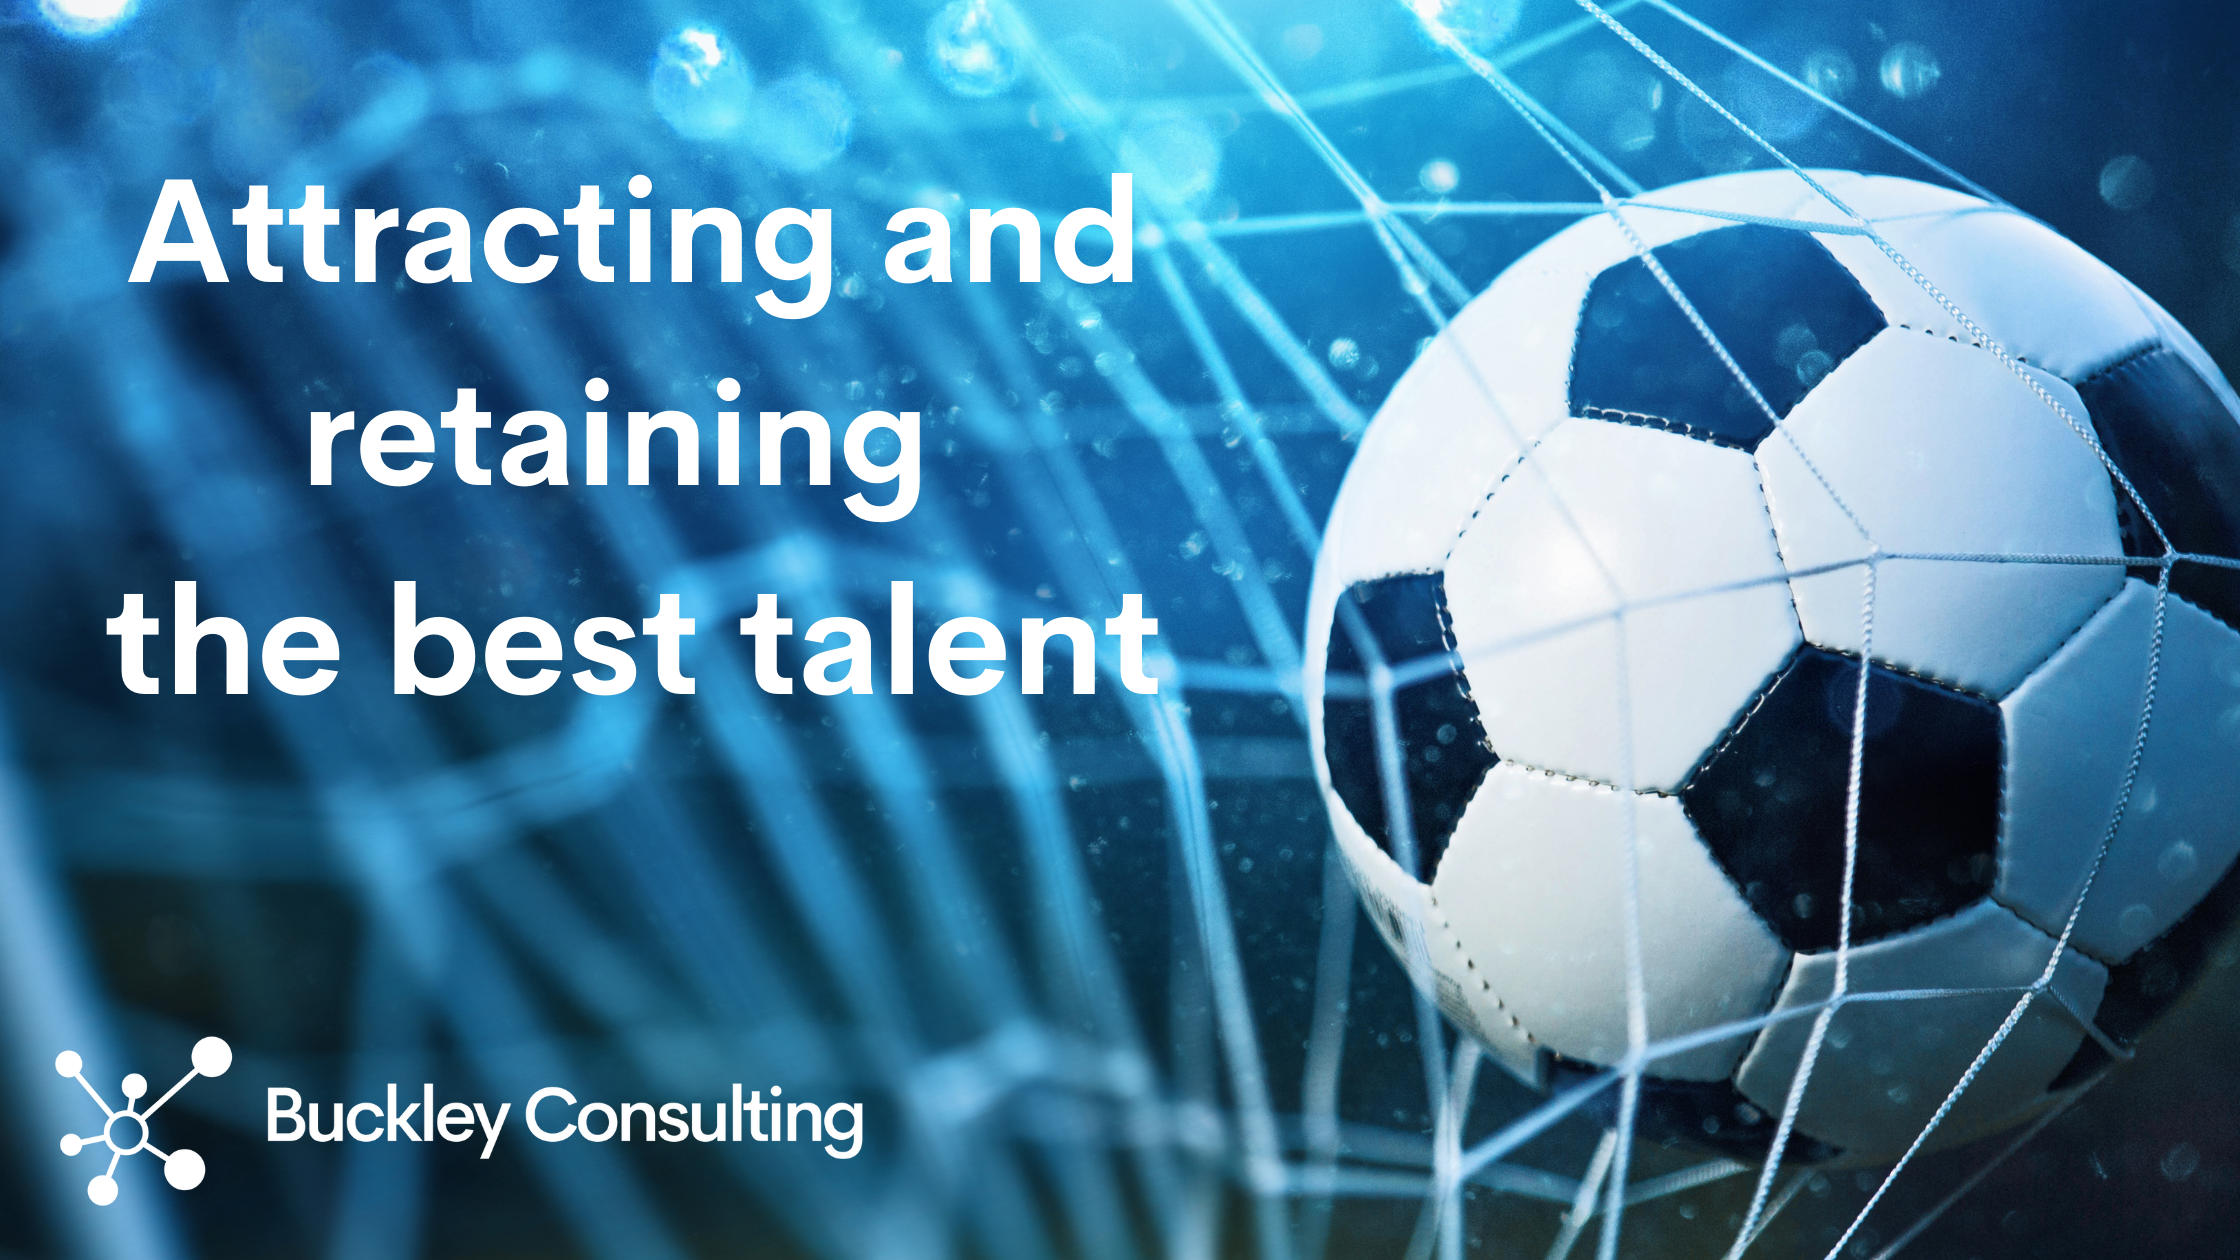 Attracting and retaining the best talent